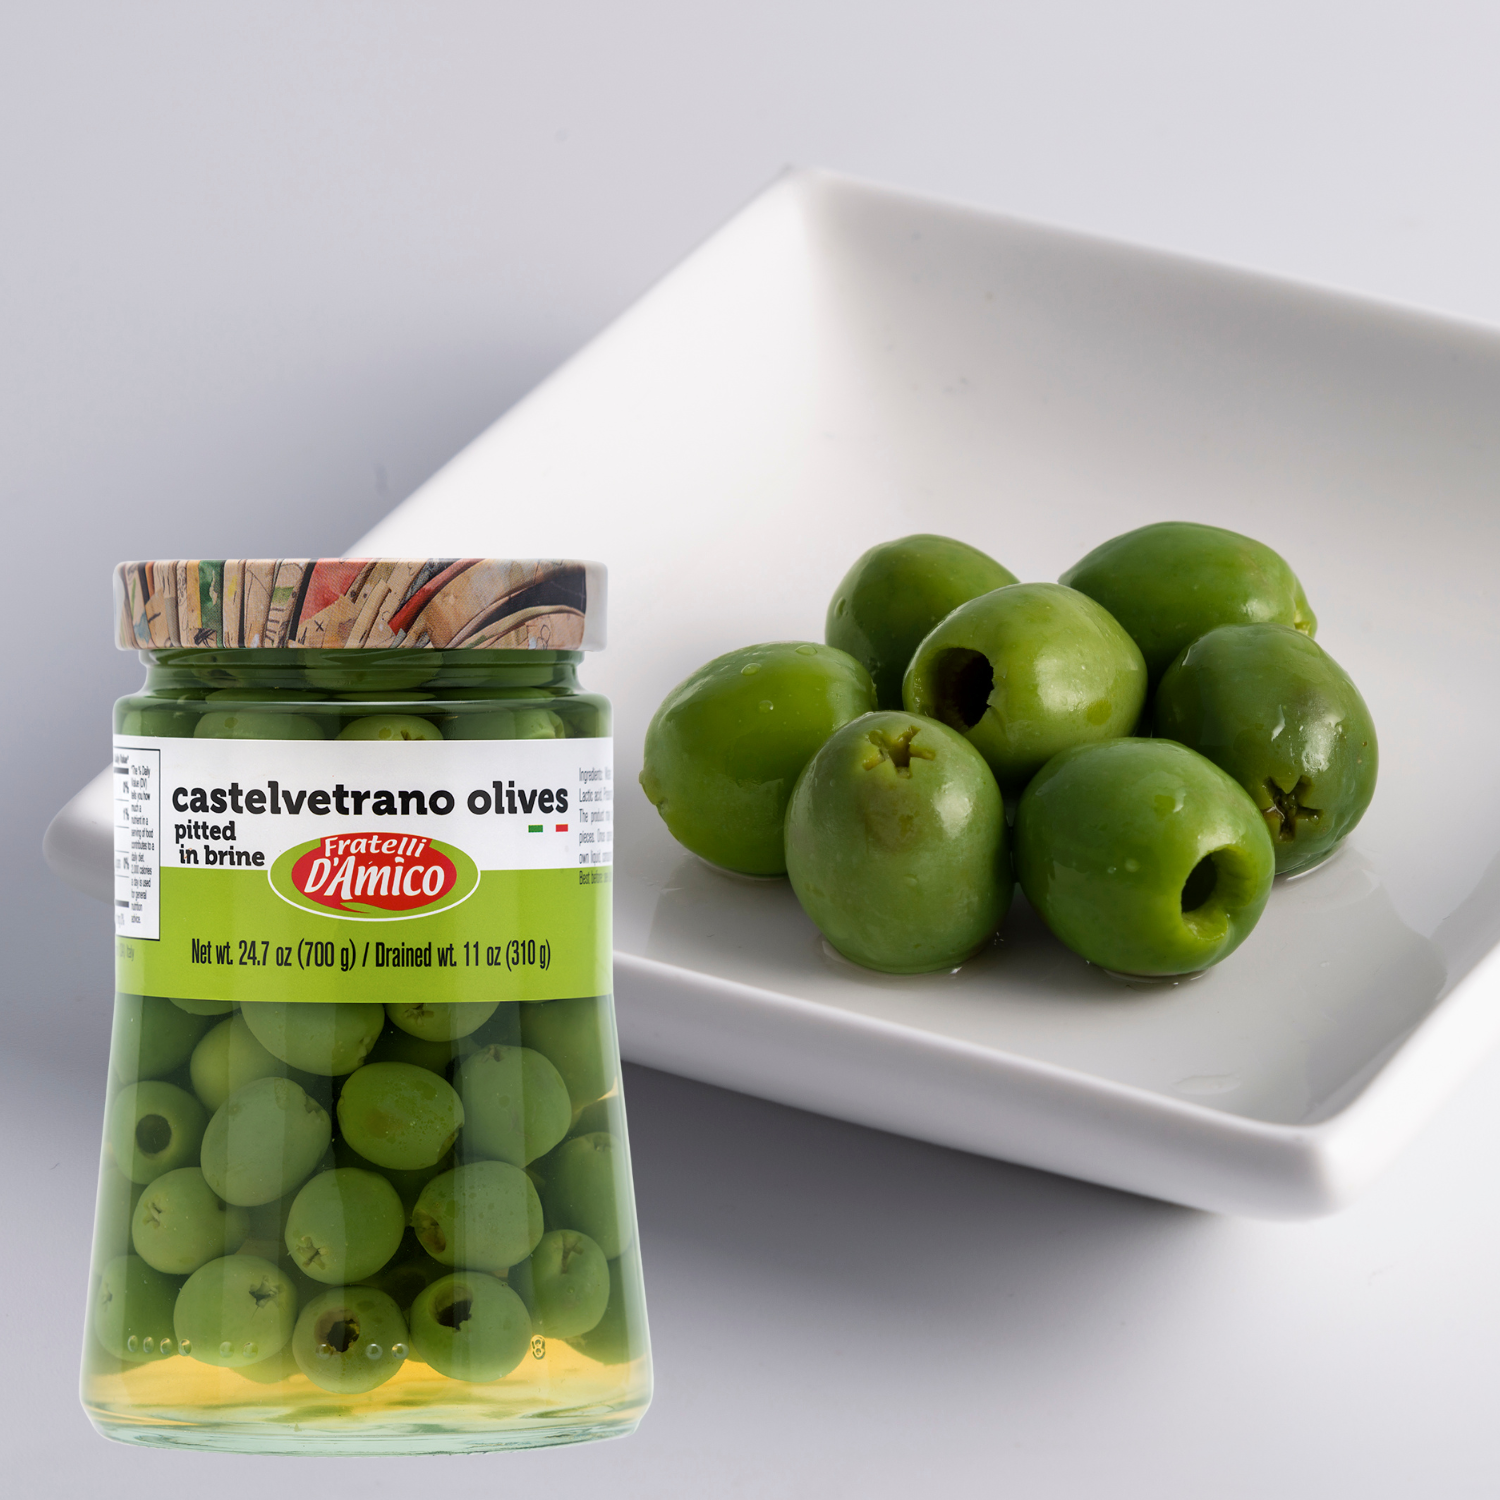 Fratelli D'Amico Castelvetrano olive (Pitted), Family-Size 24 oz (700 g).